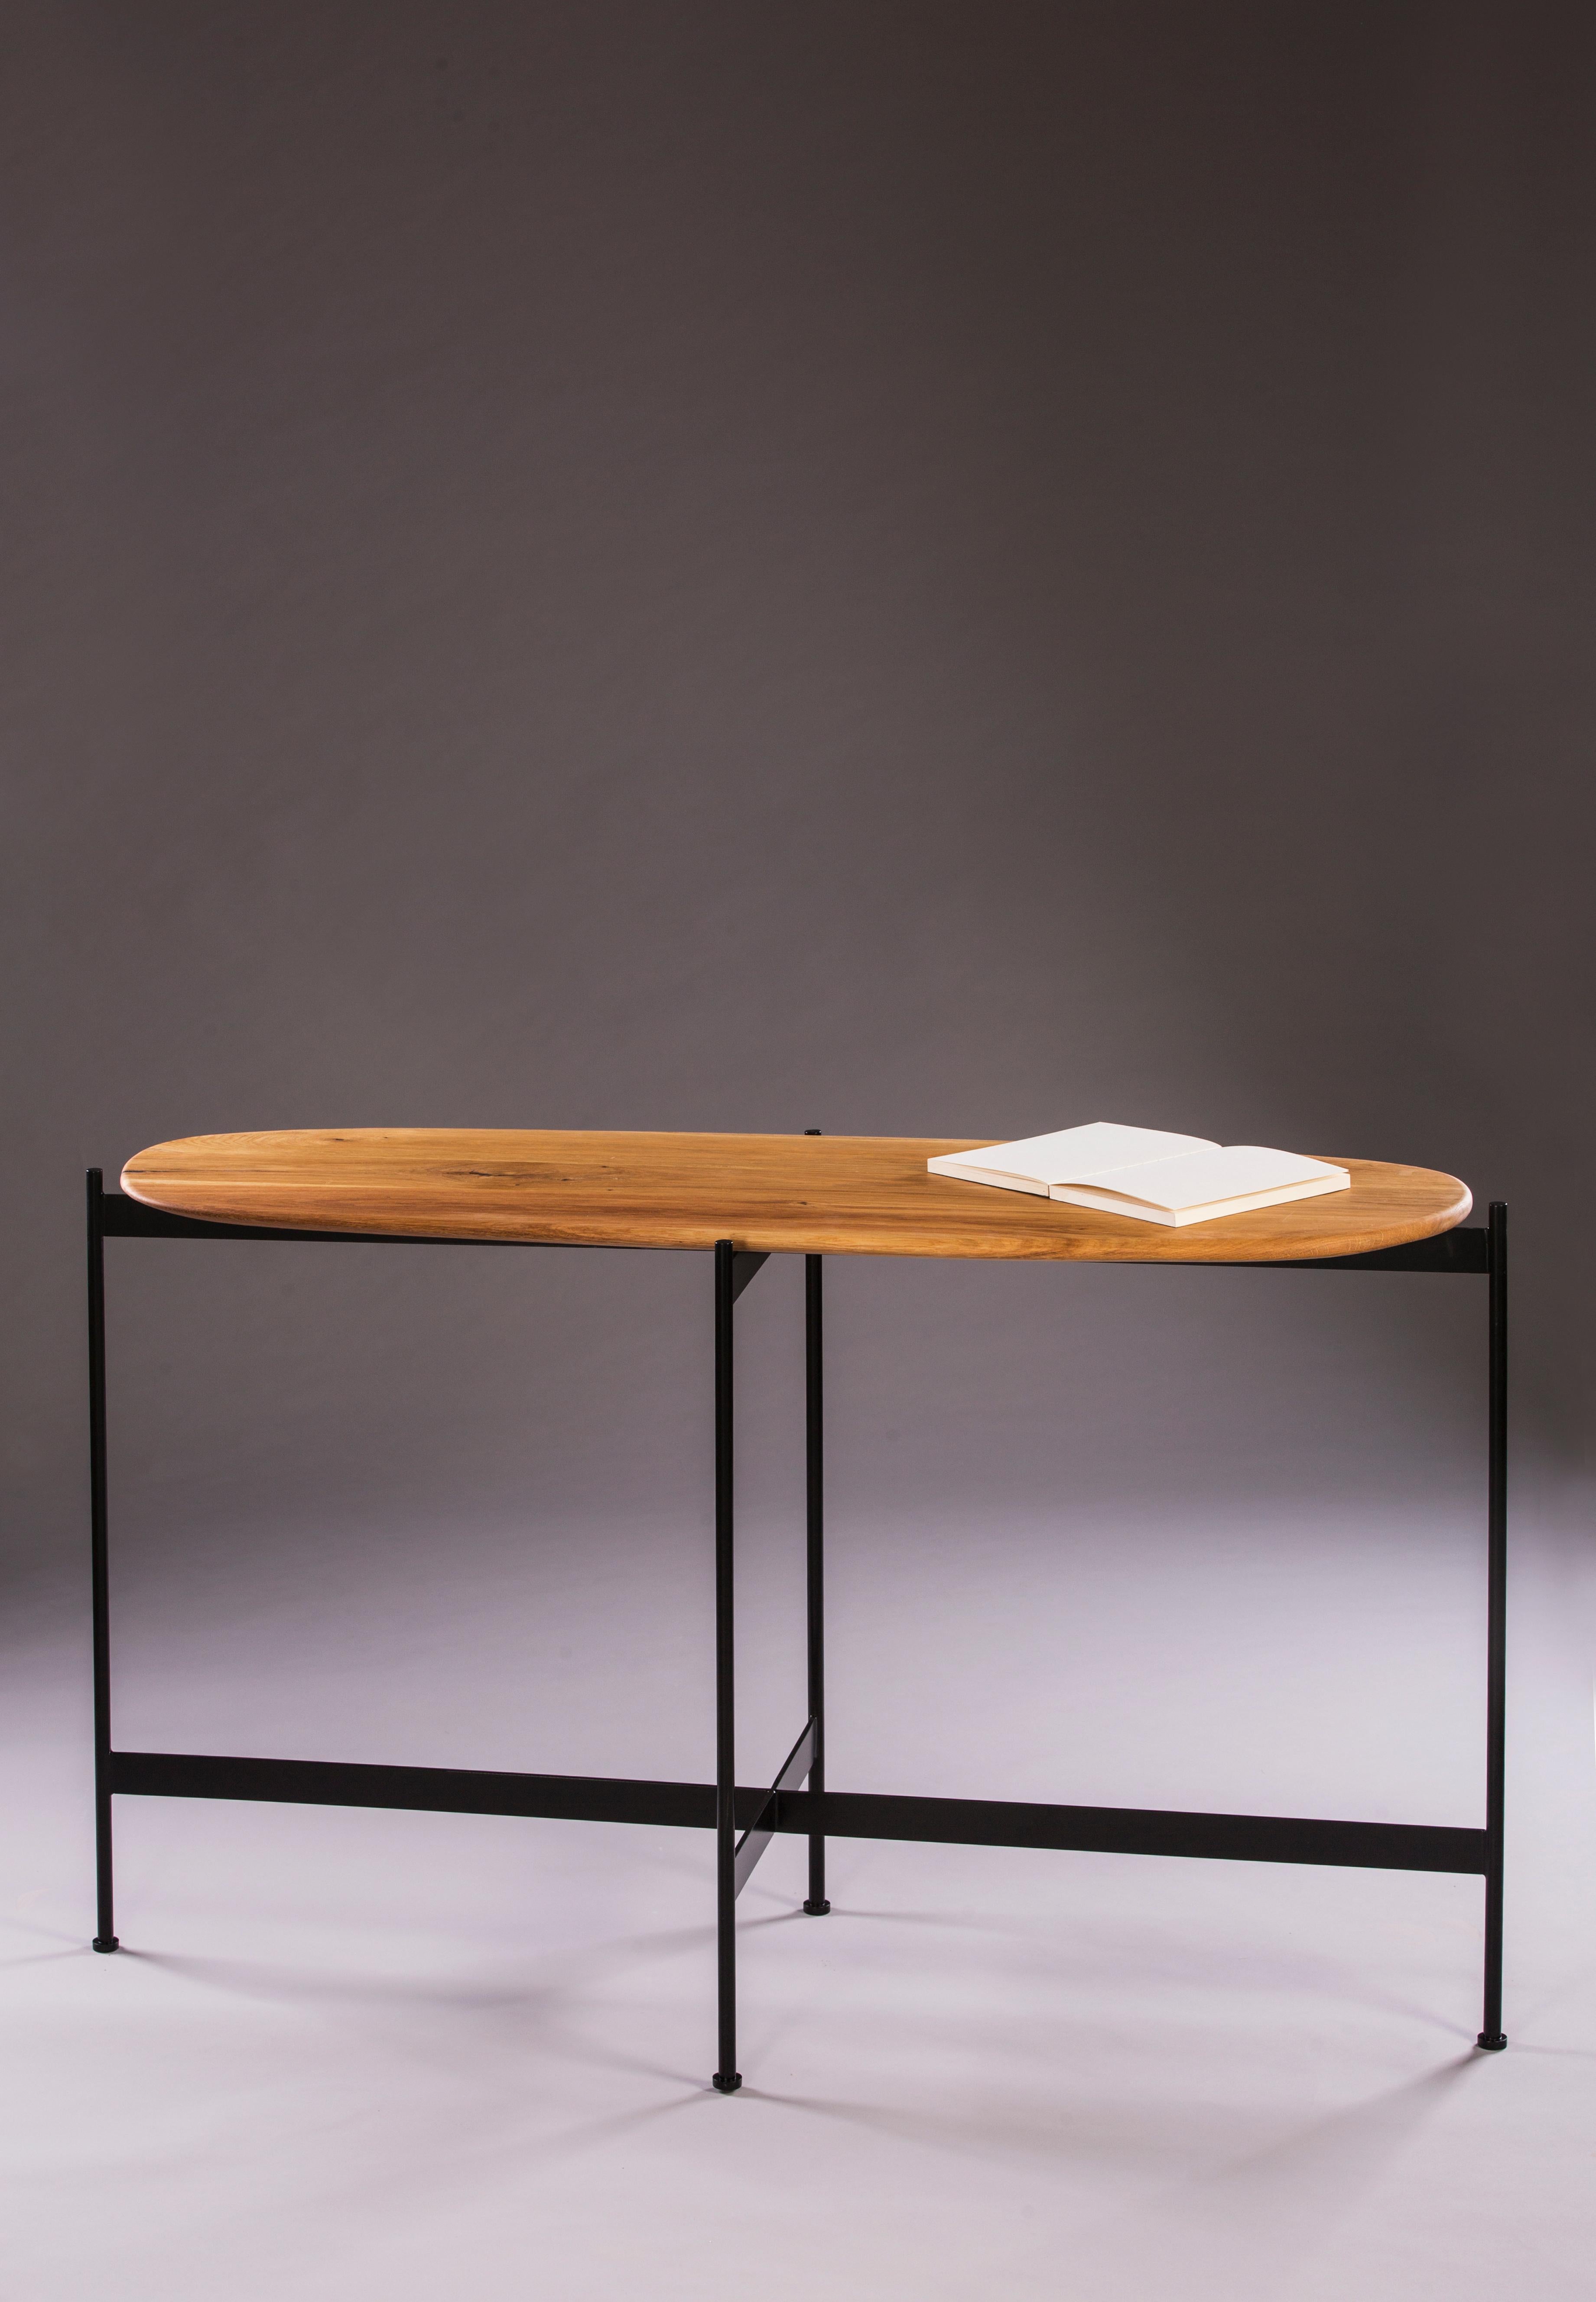 Tas console by Rectangle Studio
Dimensions: W 125 x D 45 x H 75 cm 
Materials: Massive oak, natural wood oil, black paint coating on metal

The table is shaped and finished by the designer. For this reason, each table has different and